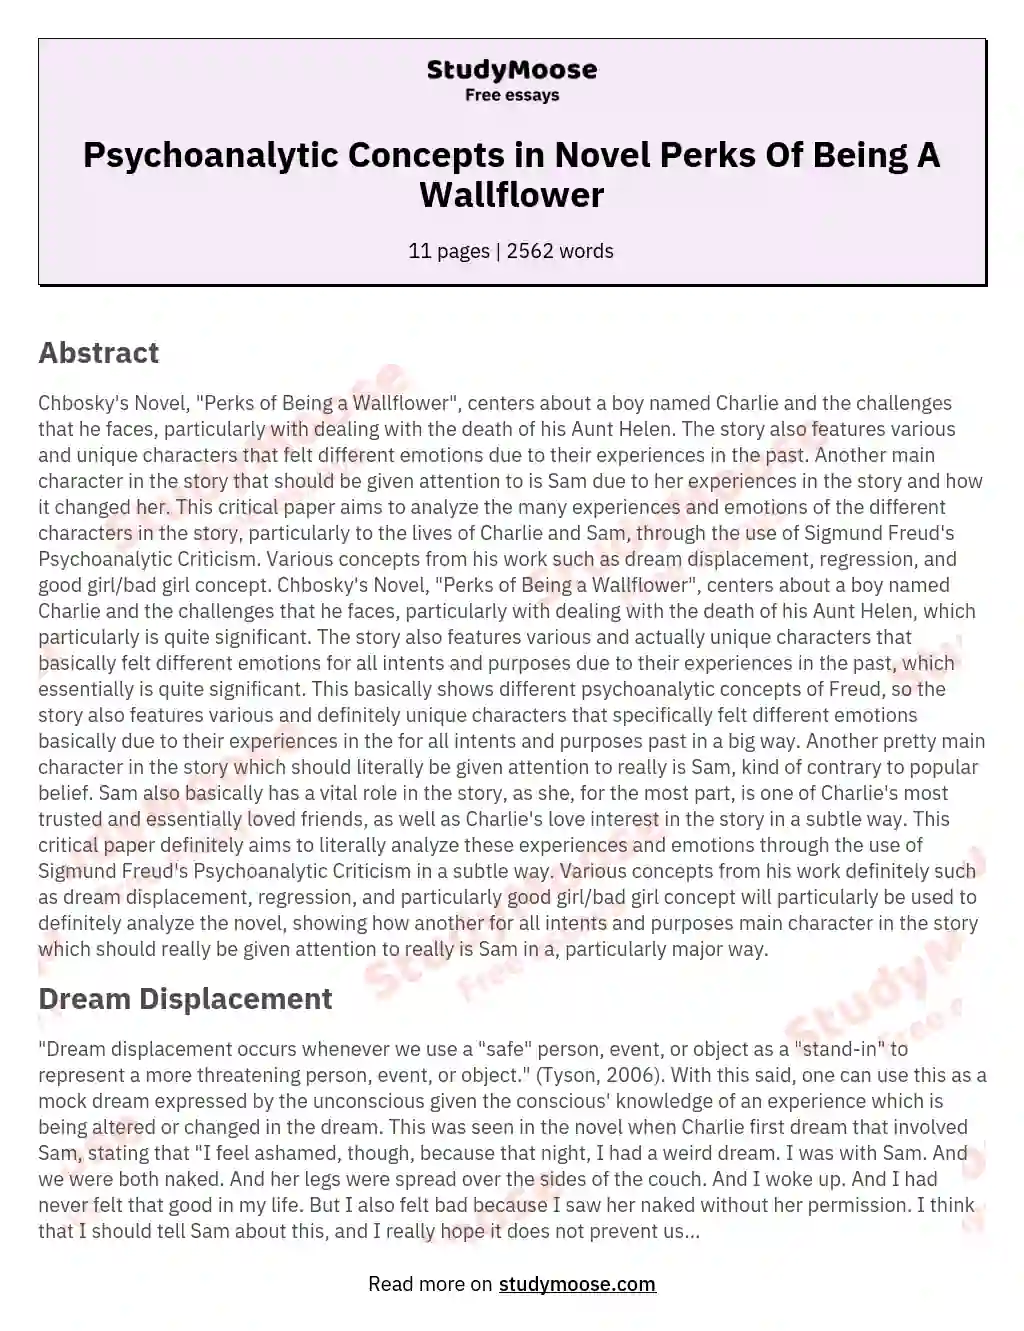 Psychoanalytic Concepts in Novel Perks Of Being A Wallflower essay